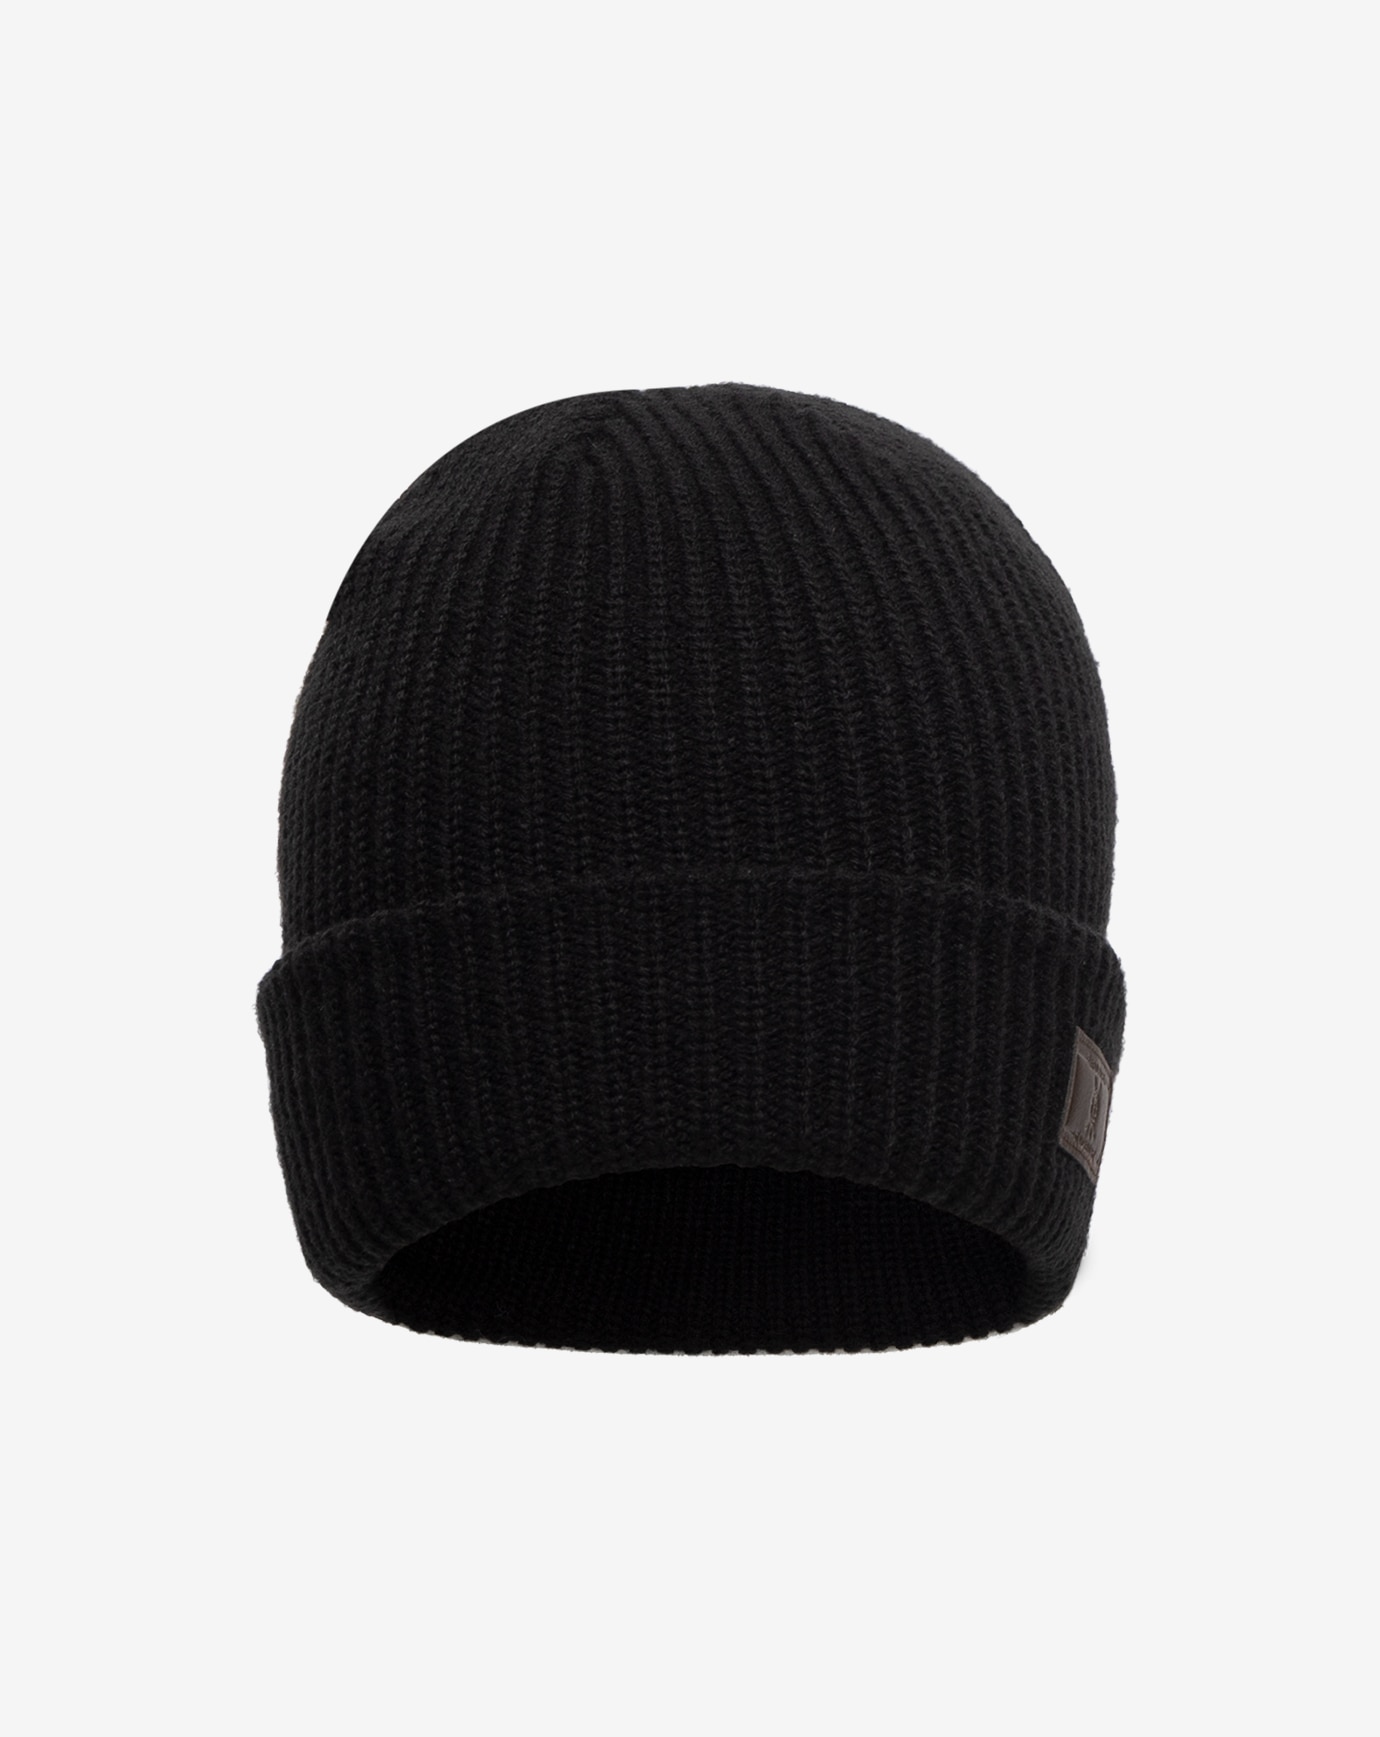 Related Product - ST ANDREWS TAKE DOWN BEANIE